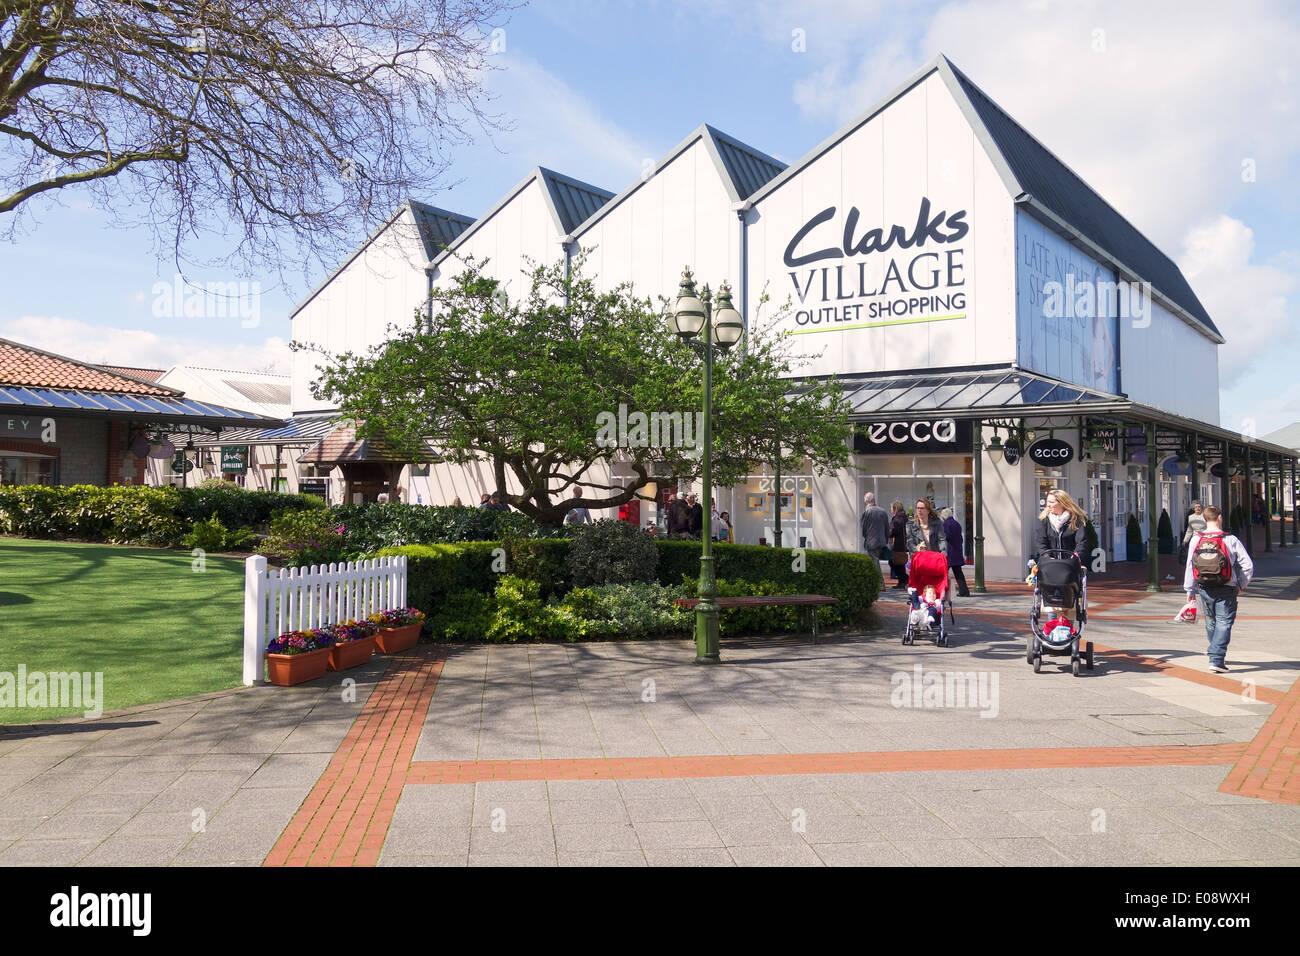 clarks outlet chile